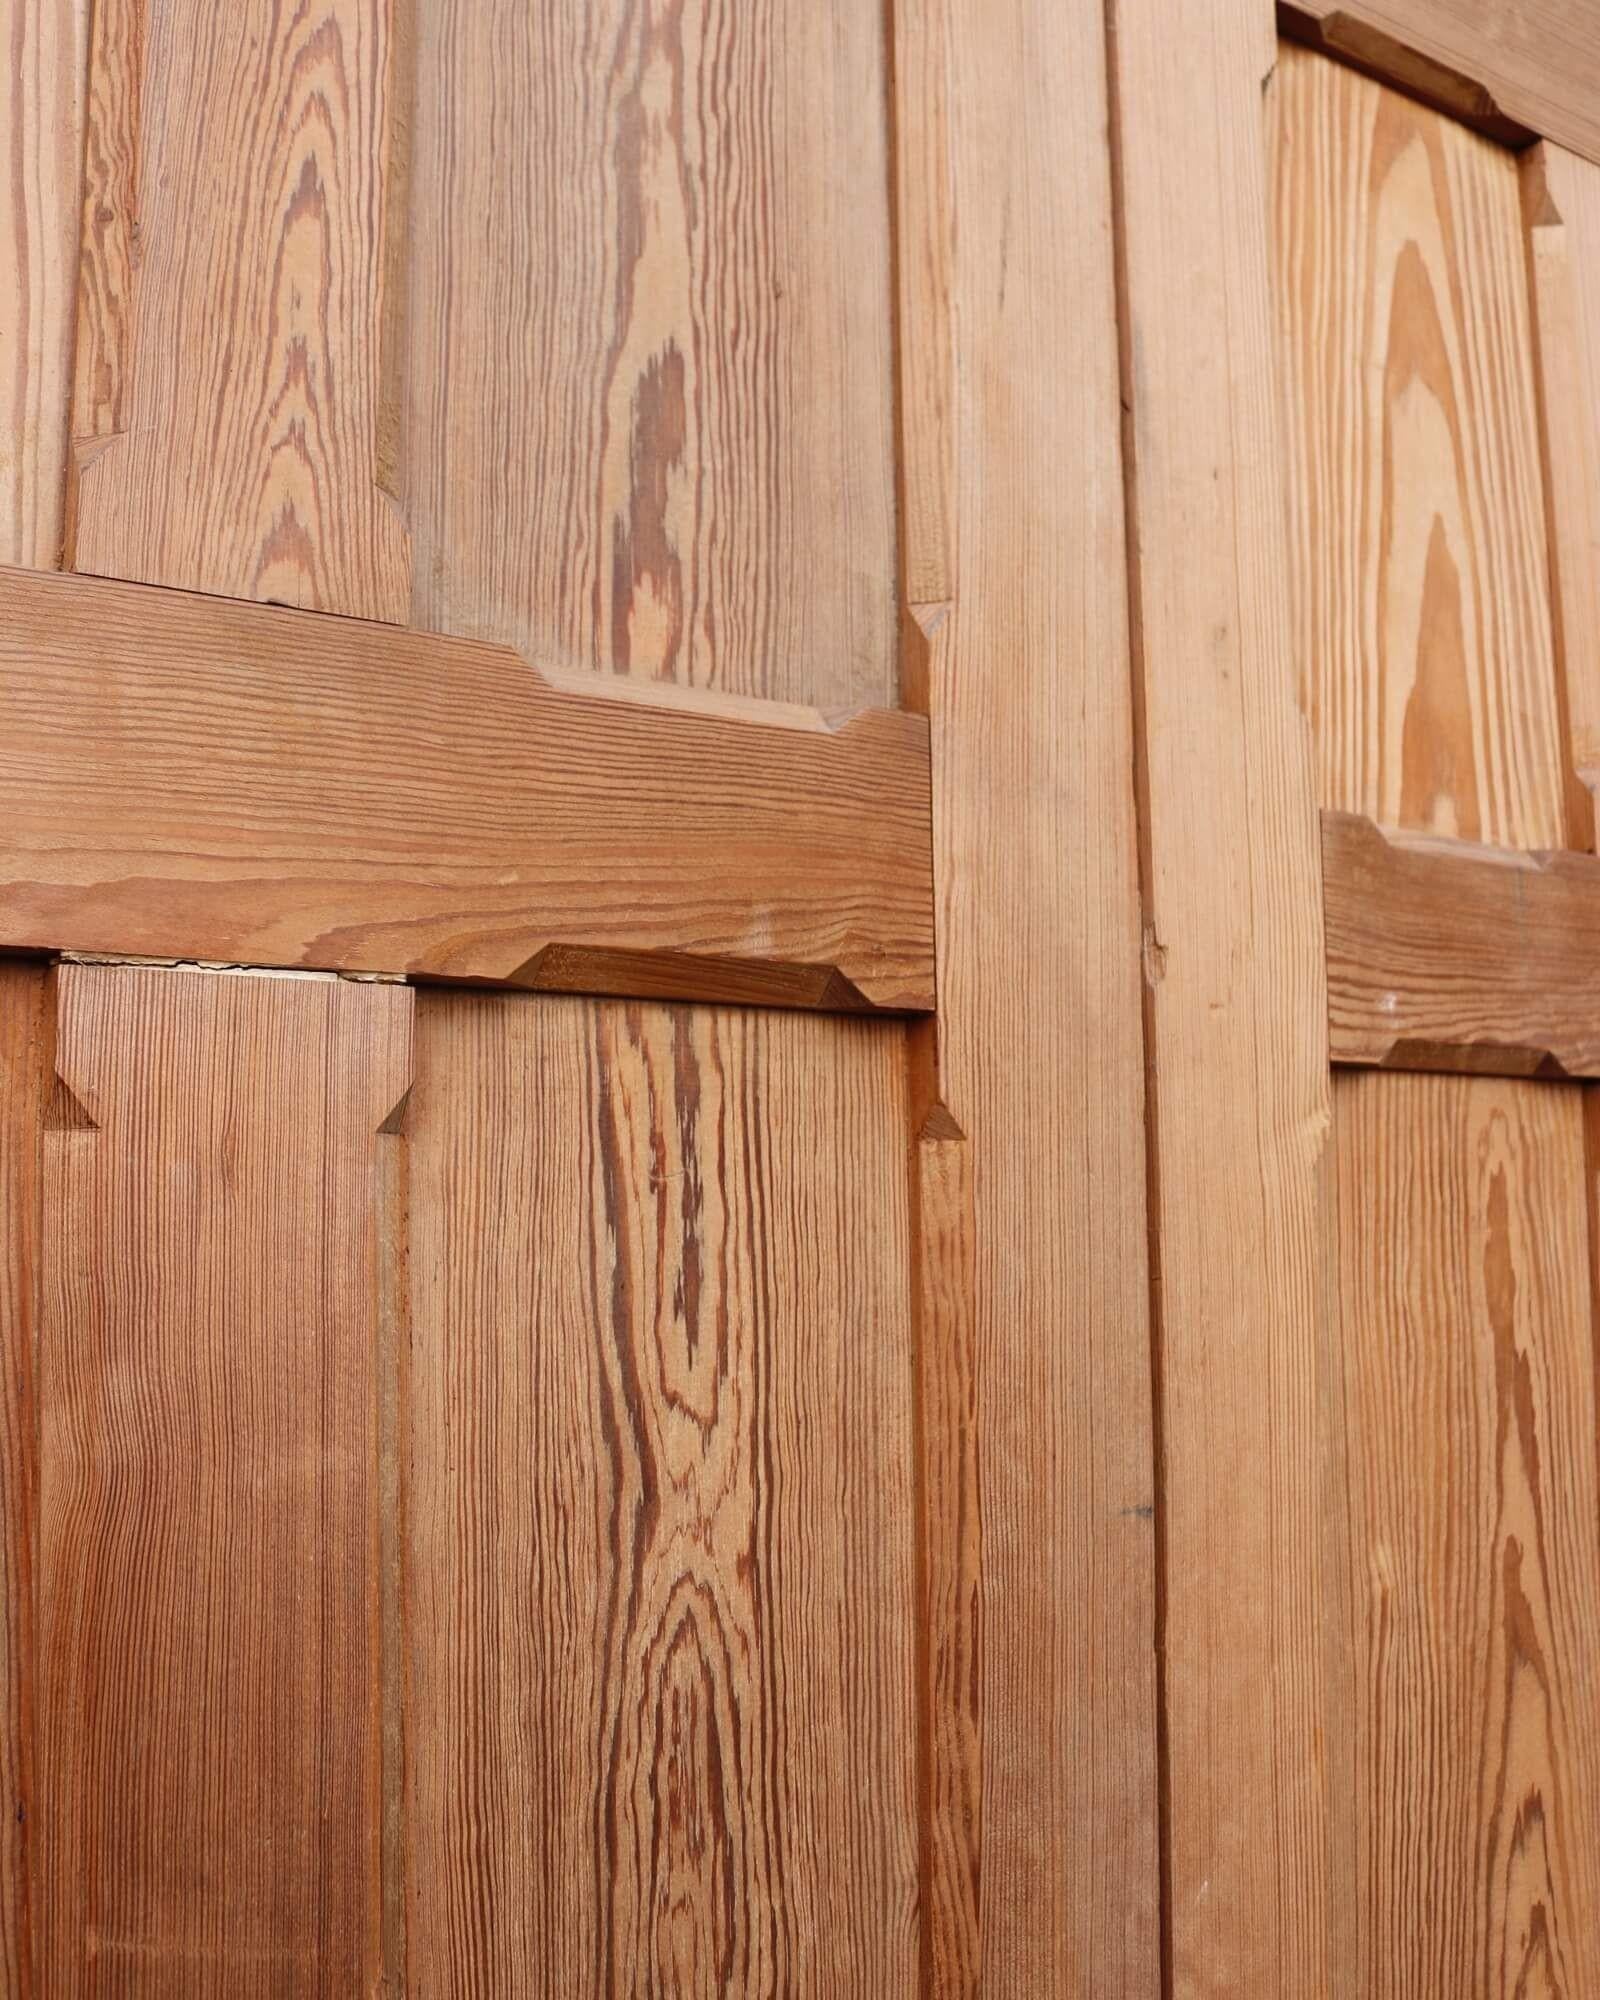 Set of Victorian 6-Panel Pitch Pine Reclaimed Chapel Doors In Fair Condition For Sale In Wormelow, Herefordshire